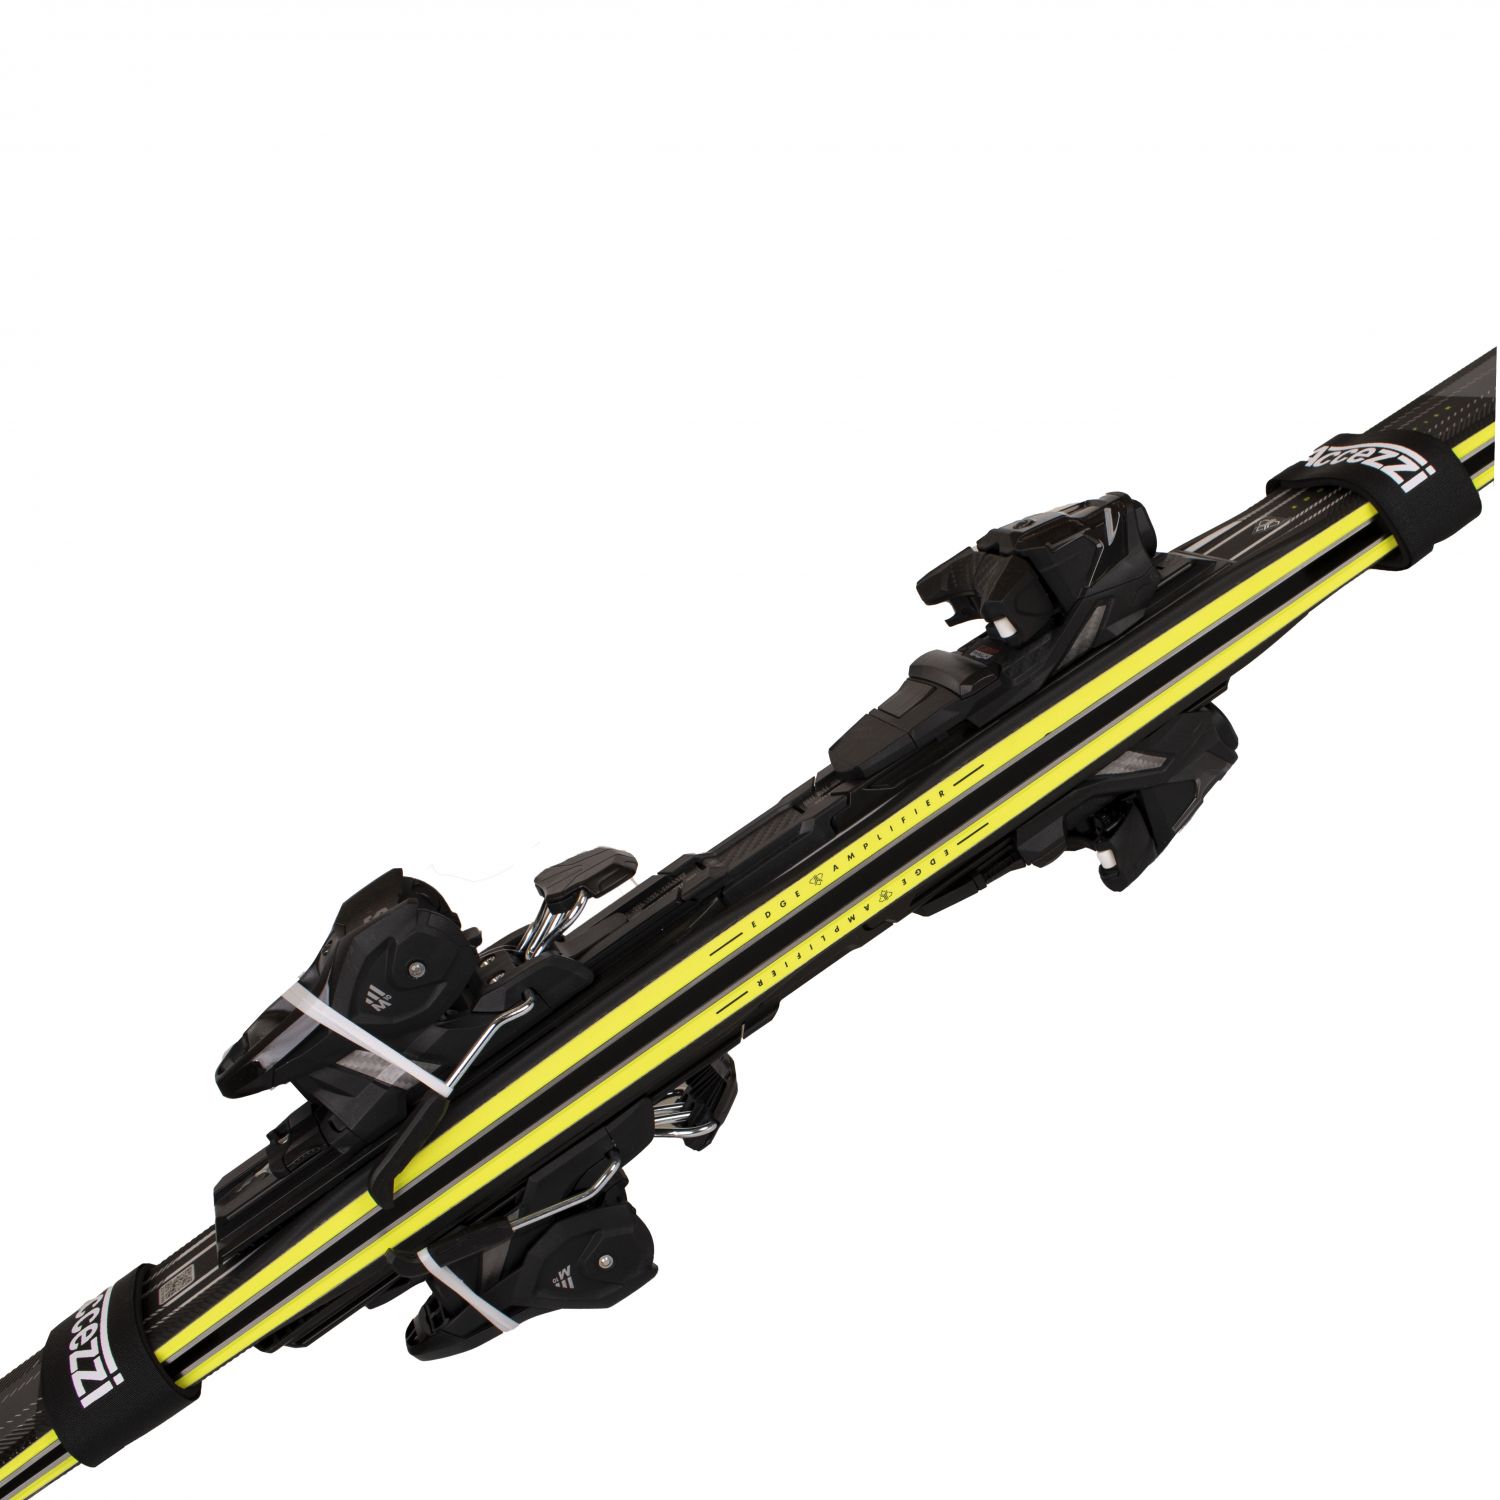 Accezzi skiclips pour carving ski